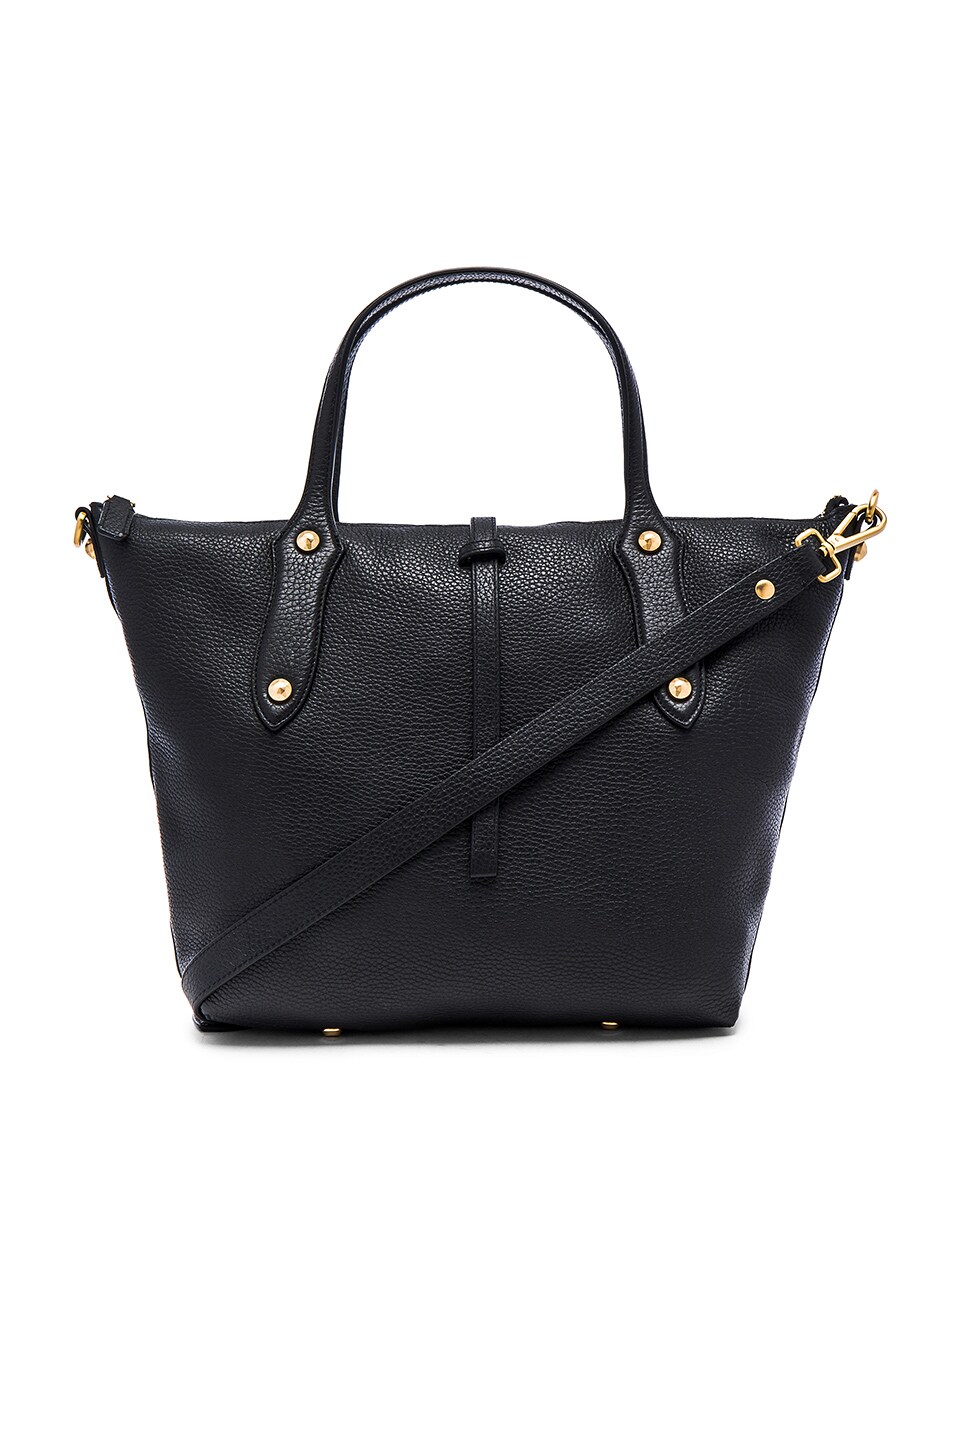 Annabel Ingall Large Cloudia Satchel in Black | REVOLVE